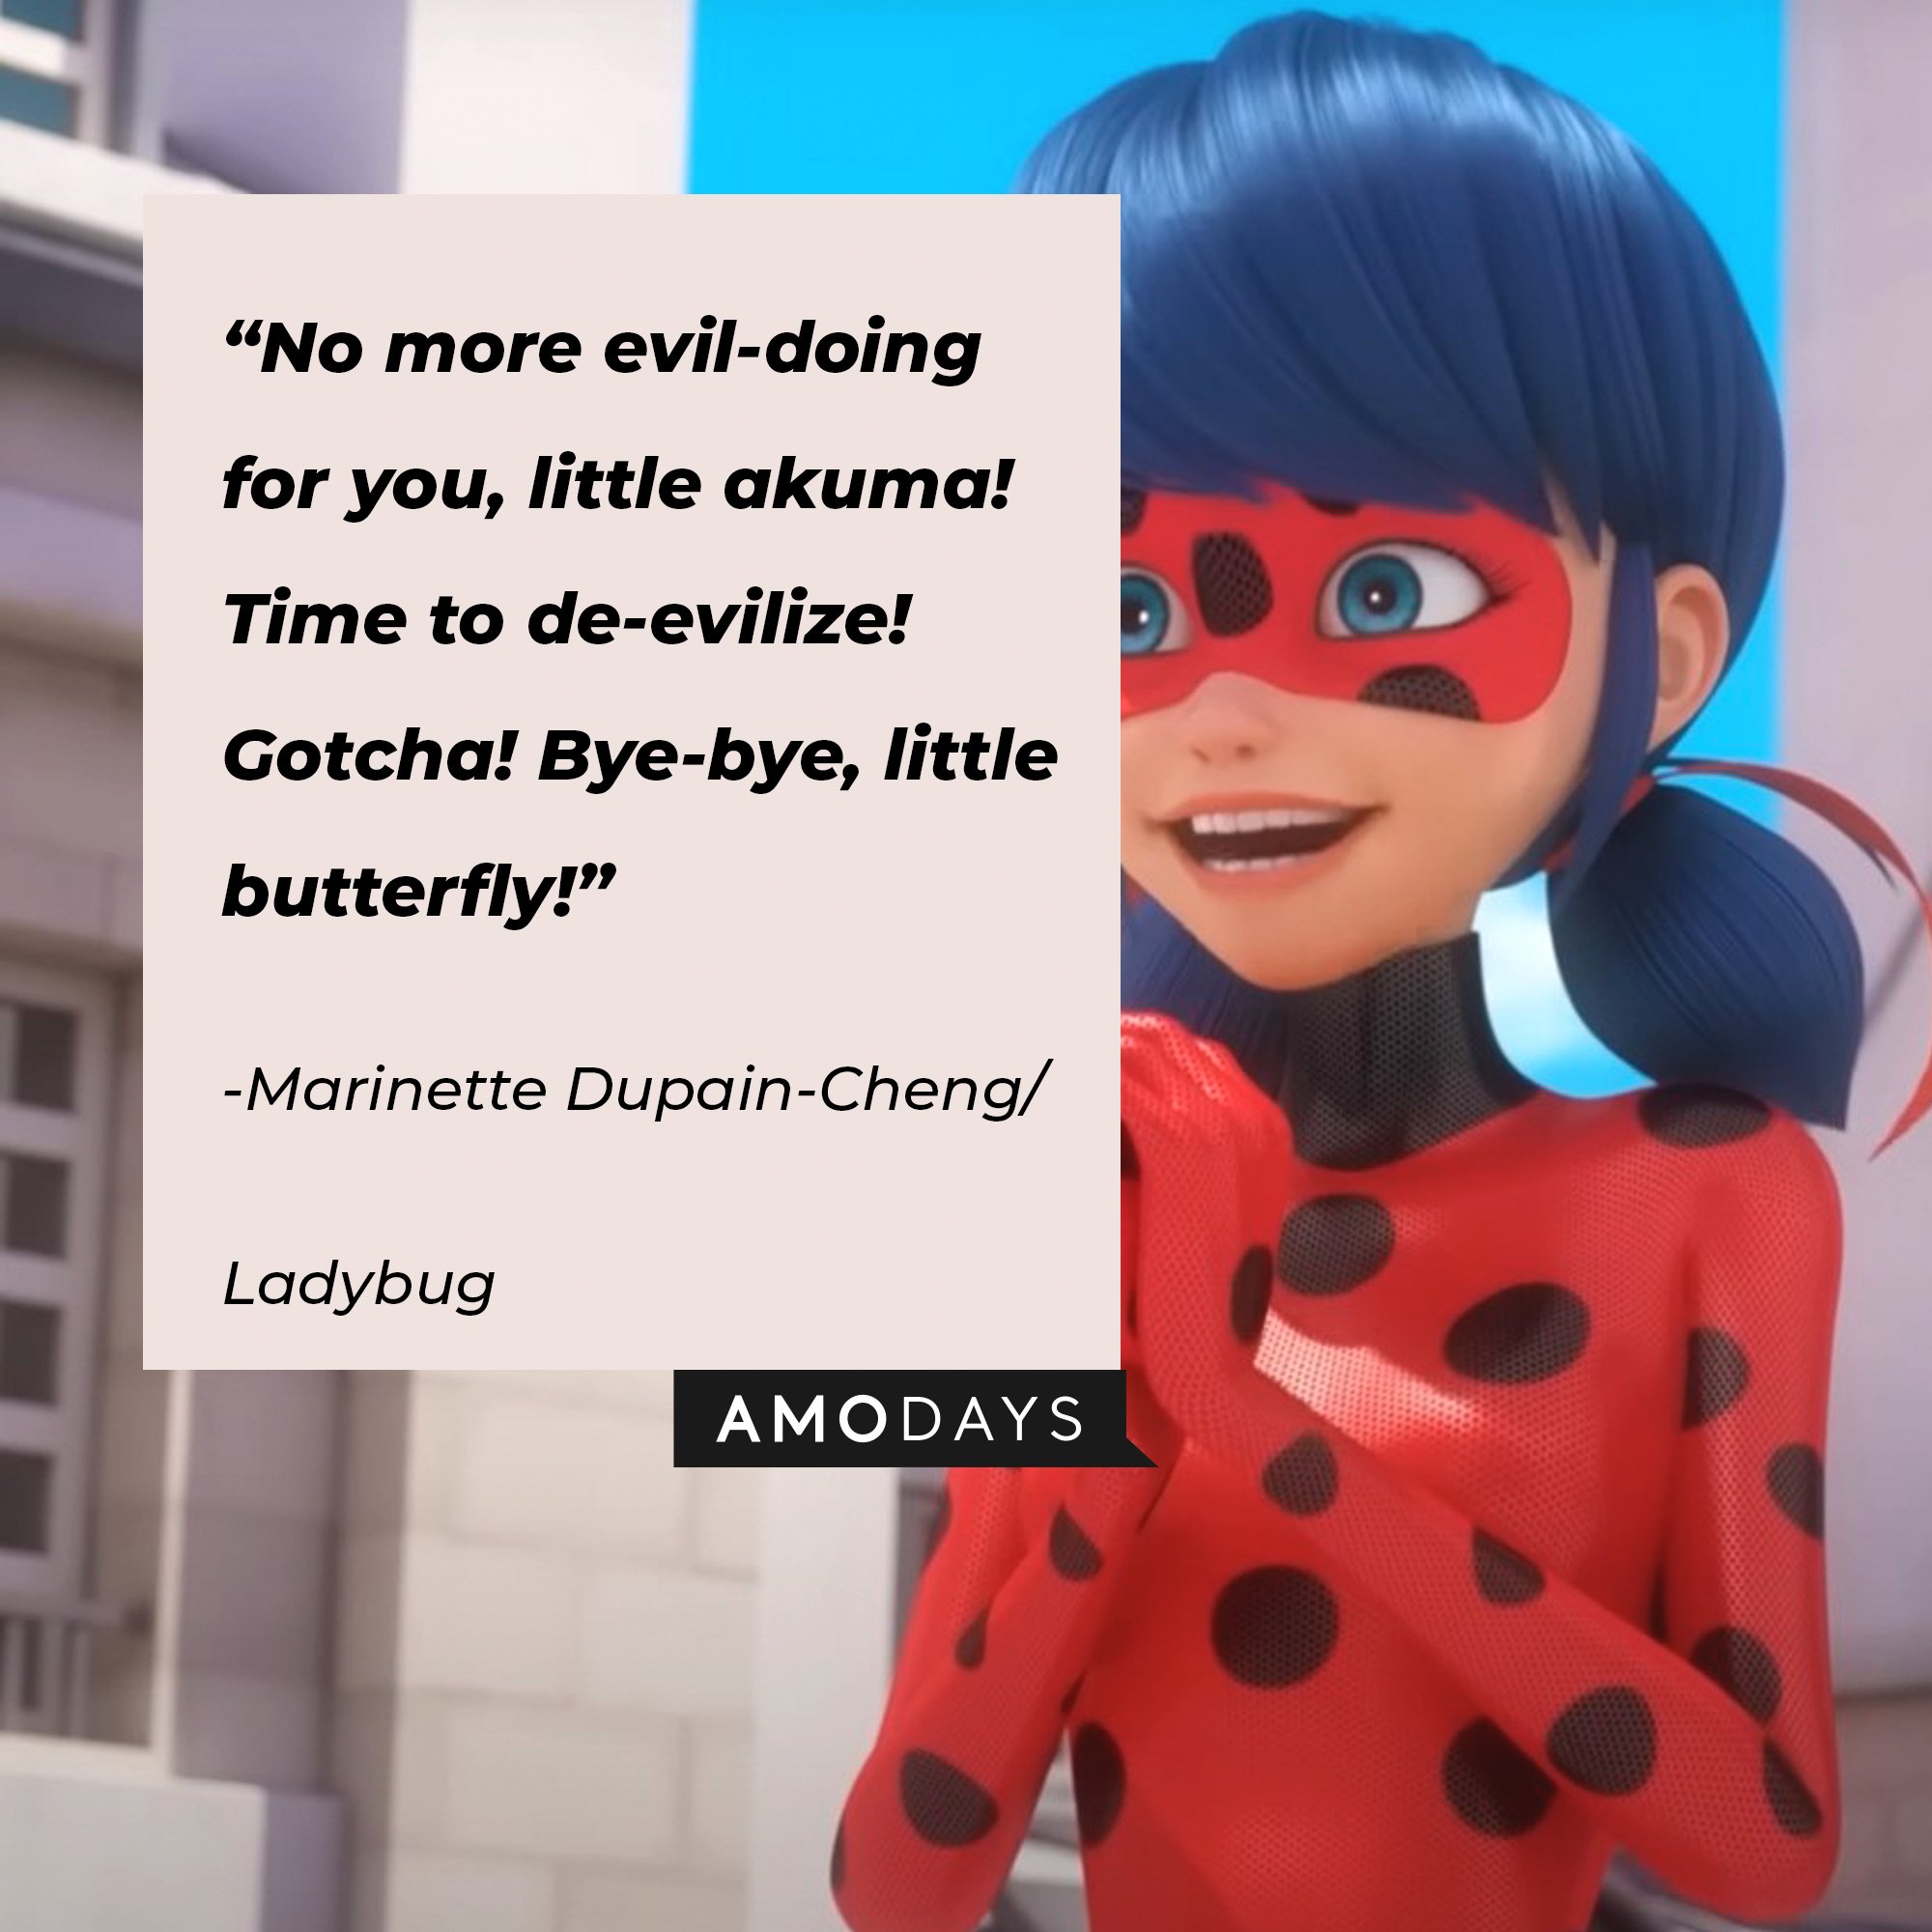 Marinette Dupain-Cheng /Ladybug’s quote: "No more evil-doing for you, little akuma! Time to de-evilize! Gotcha! Bye-bye, little butterfly!" | Image: AmoDays